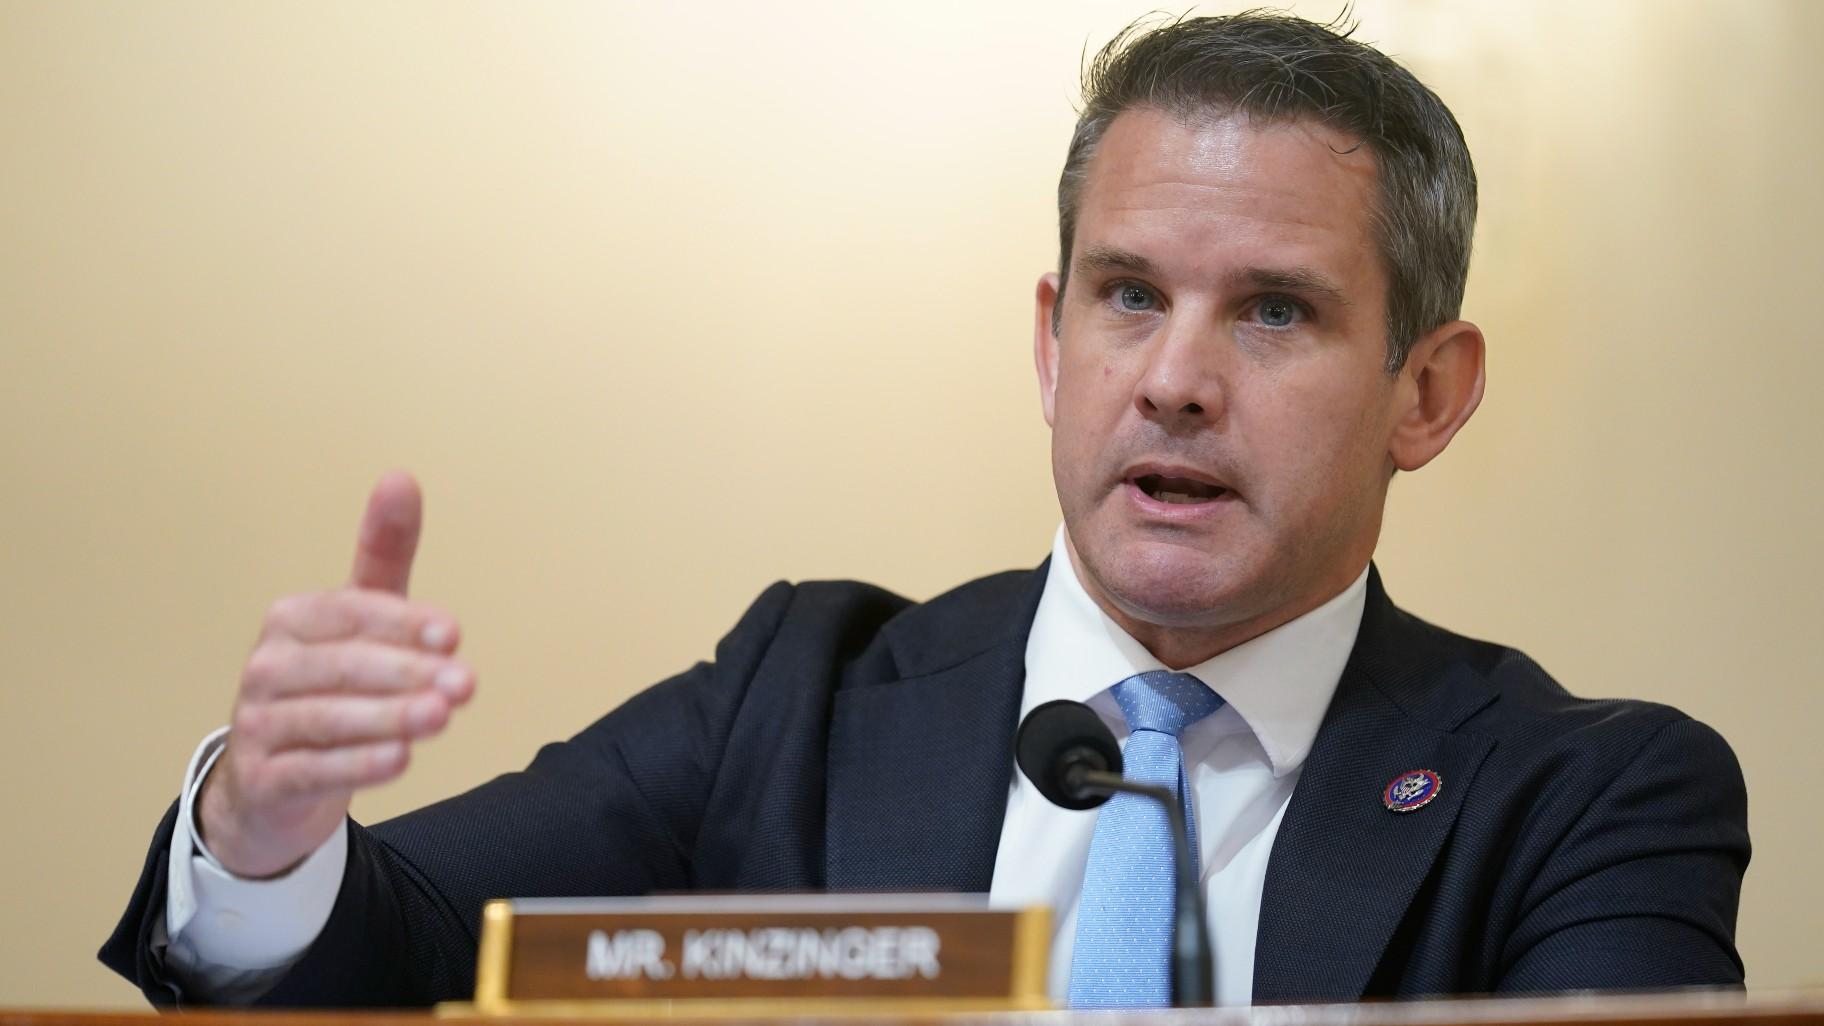 Rep. Adam Kinzinger, R-Ill., questions witnesses during the House select committee hearing on the Jan. 6 attack on Capitol Hill in Washington, July 27, 2021. (AP Photo / Andrew Harnik, Pool, File)